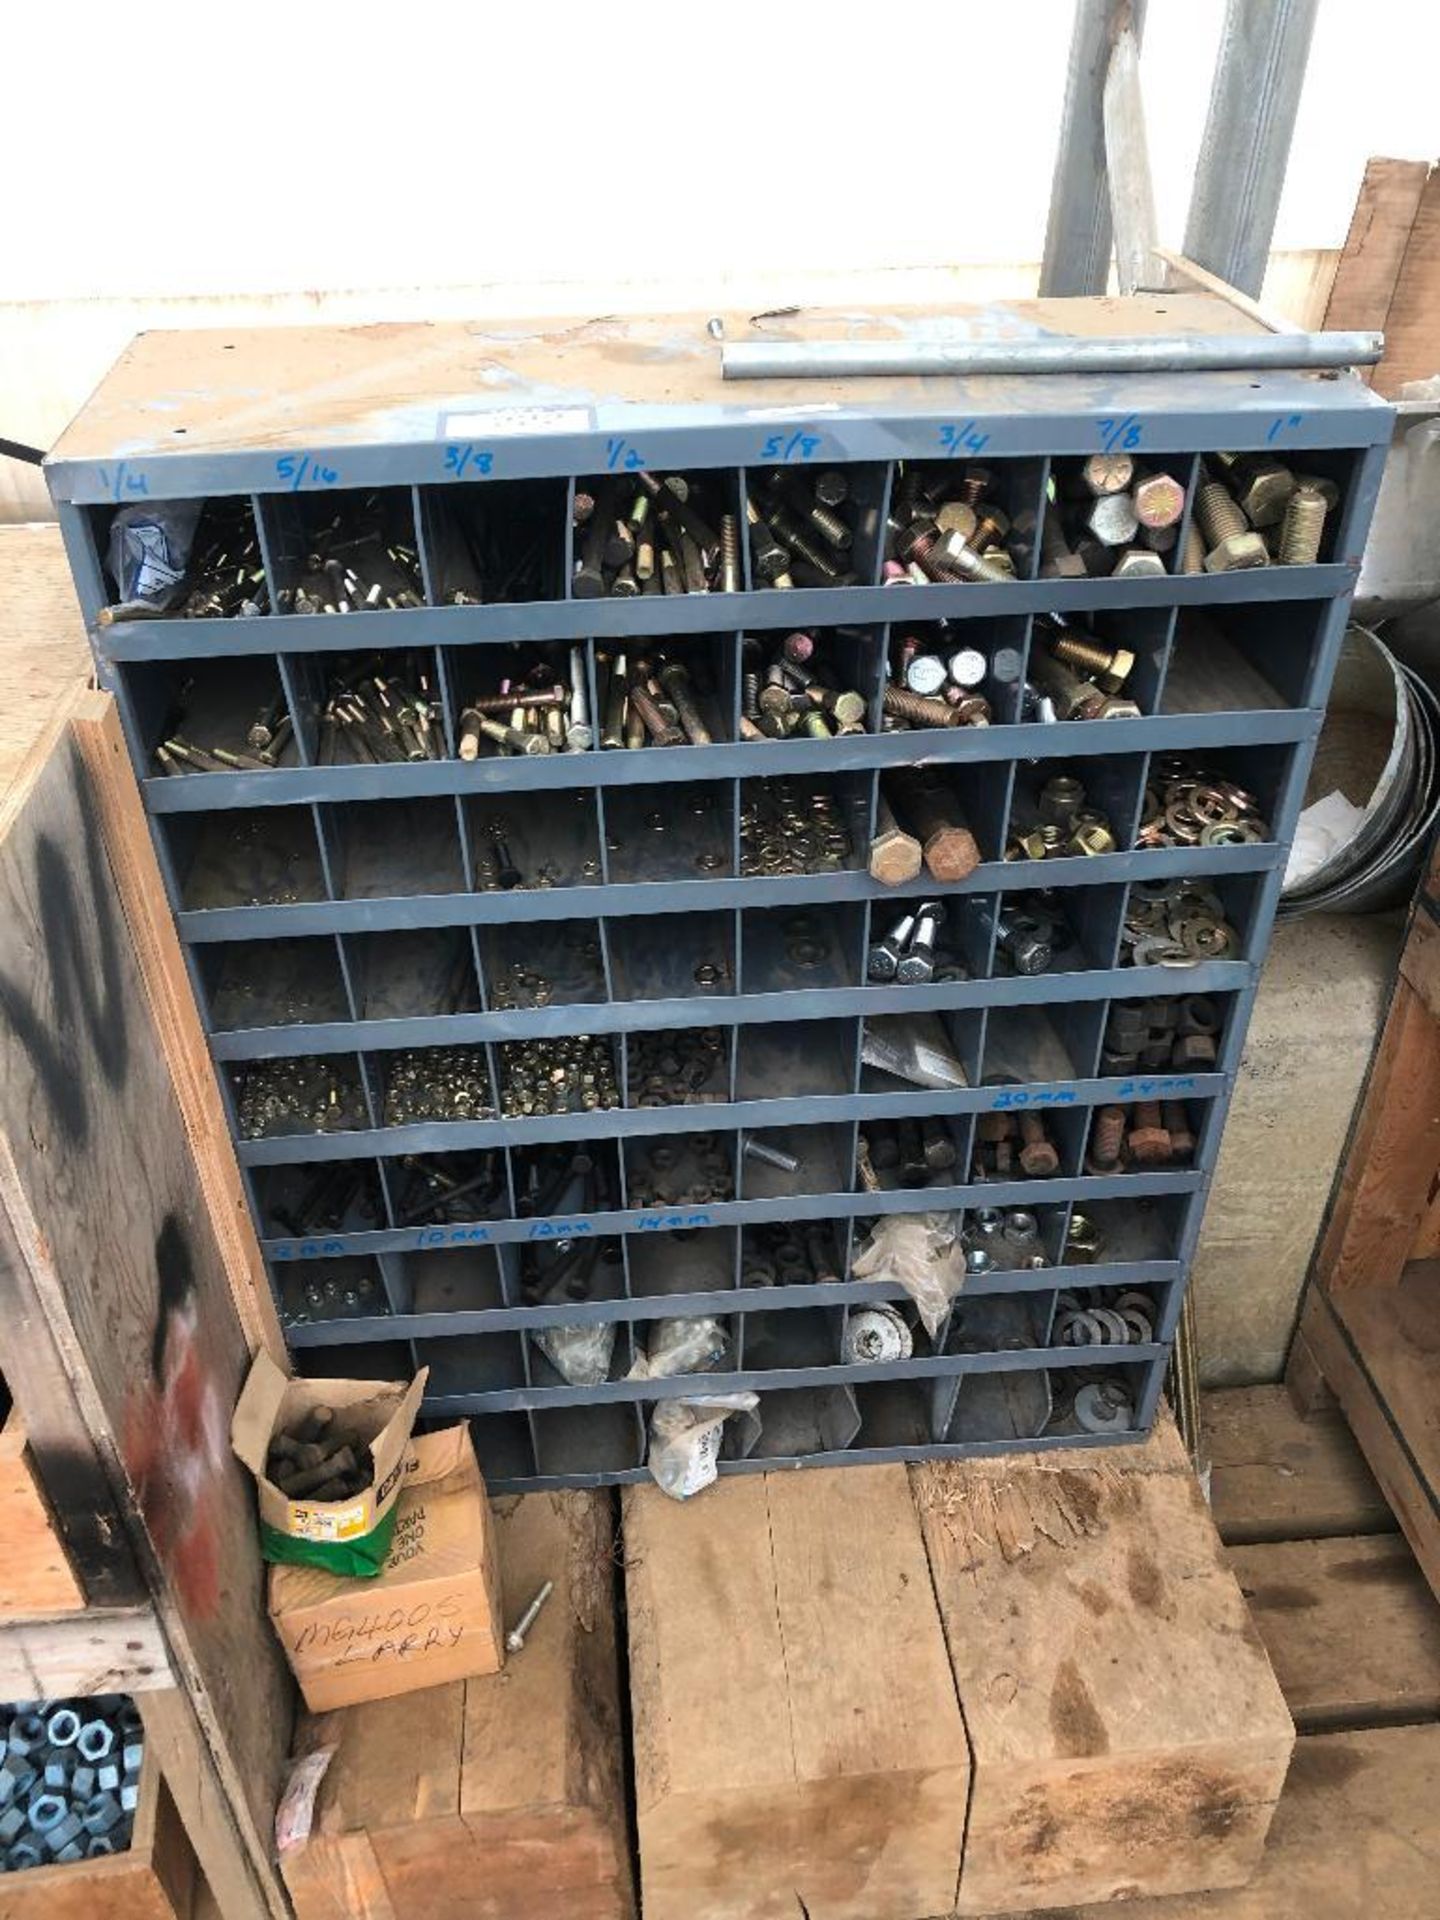 72-Compartment Parts Bin w/ Asst. Contents including Bolts, Washers, Nuts, etc.